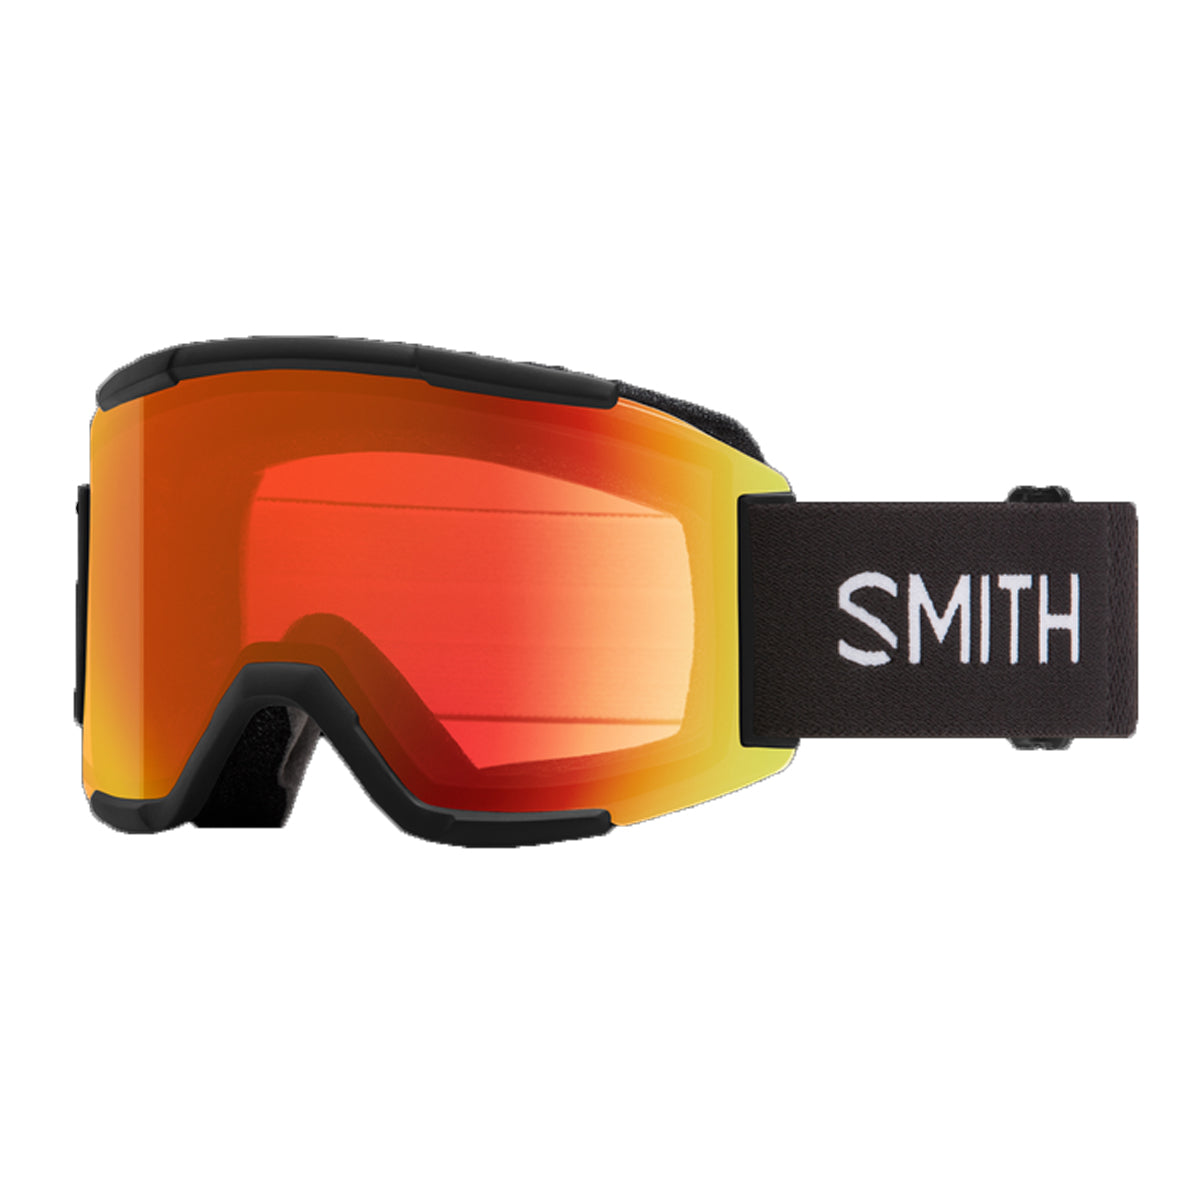 SMITH SQUAD MAG SNOWBOARD GOGGLES - LOW BRIDGE FIT (PHOTOCHROMATIC LENS)